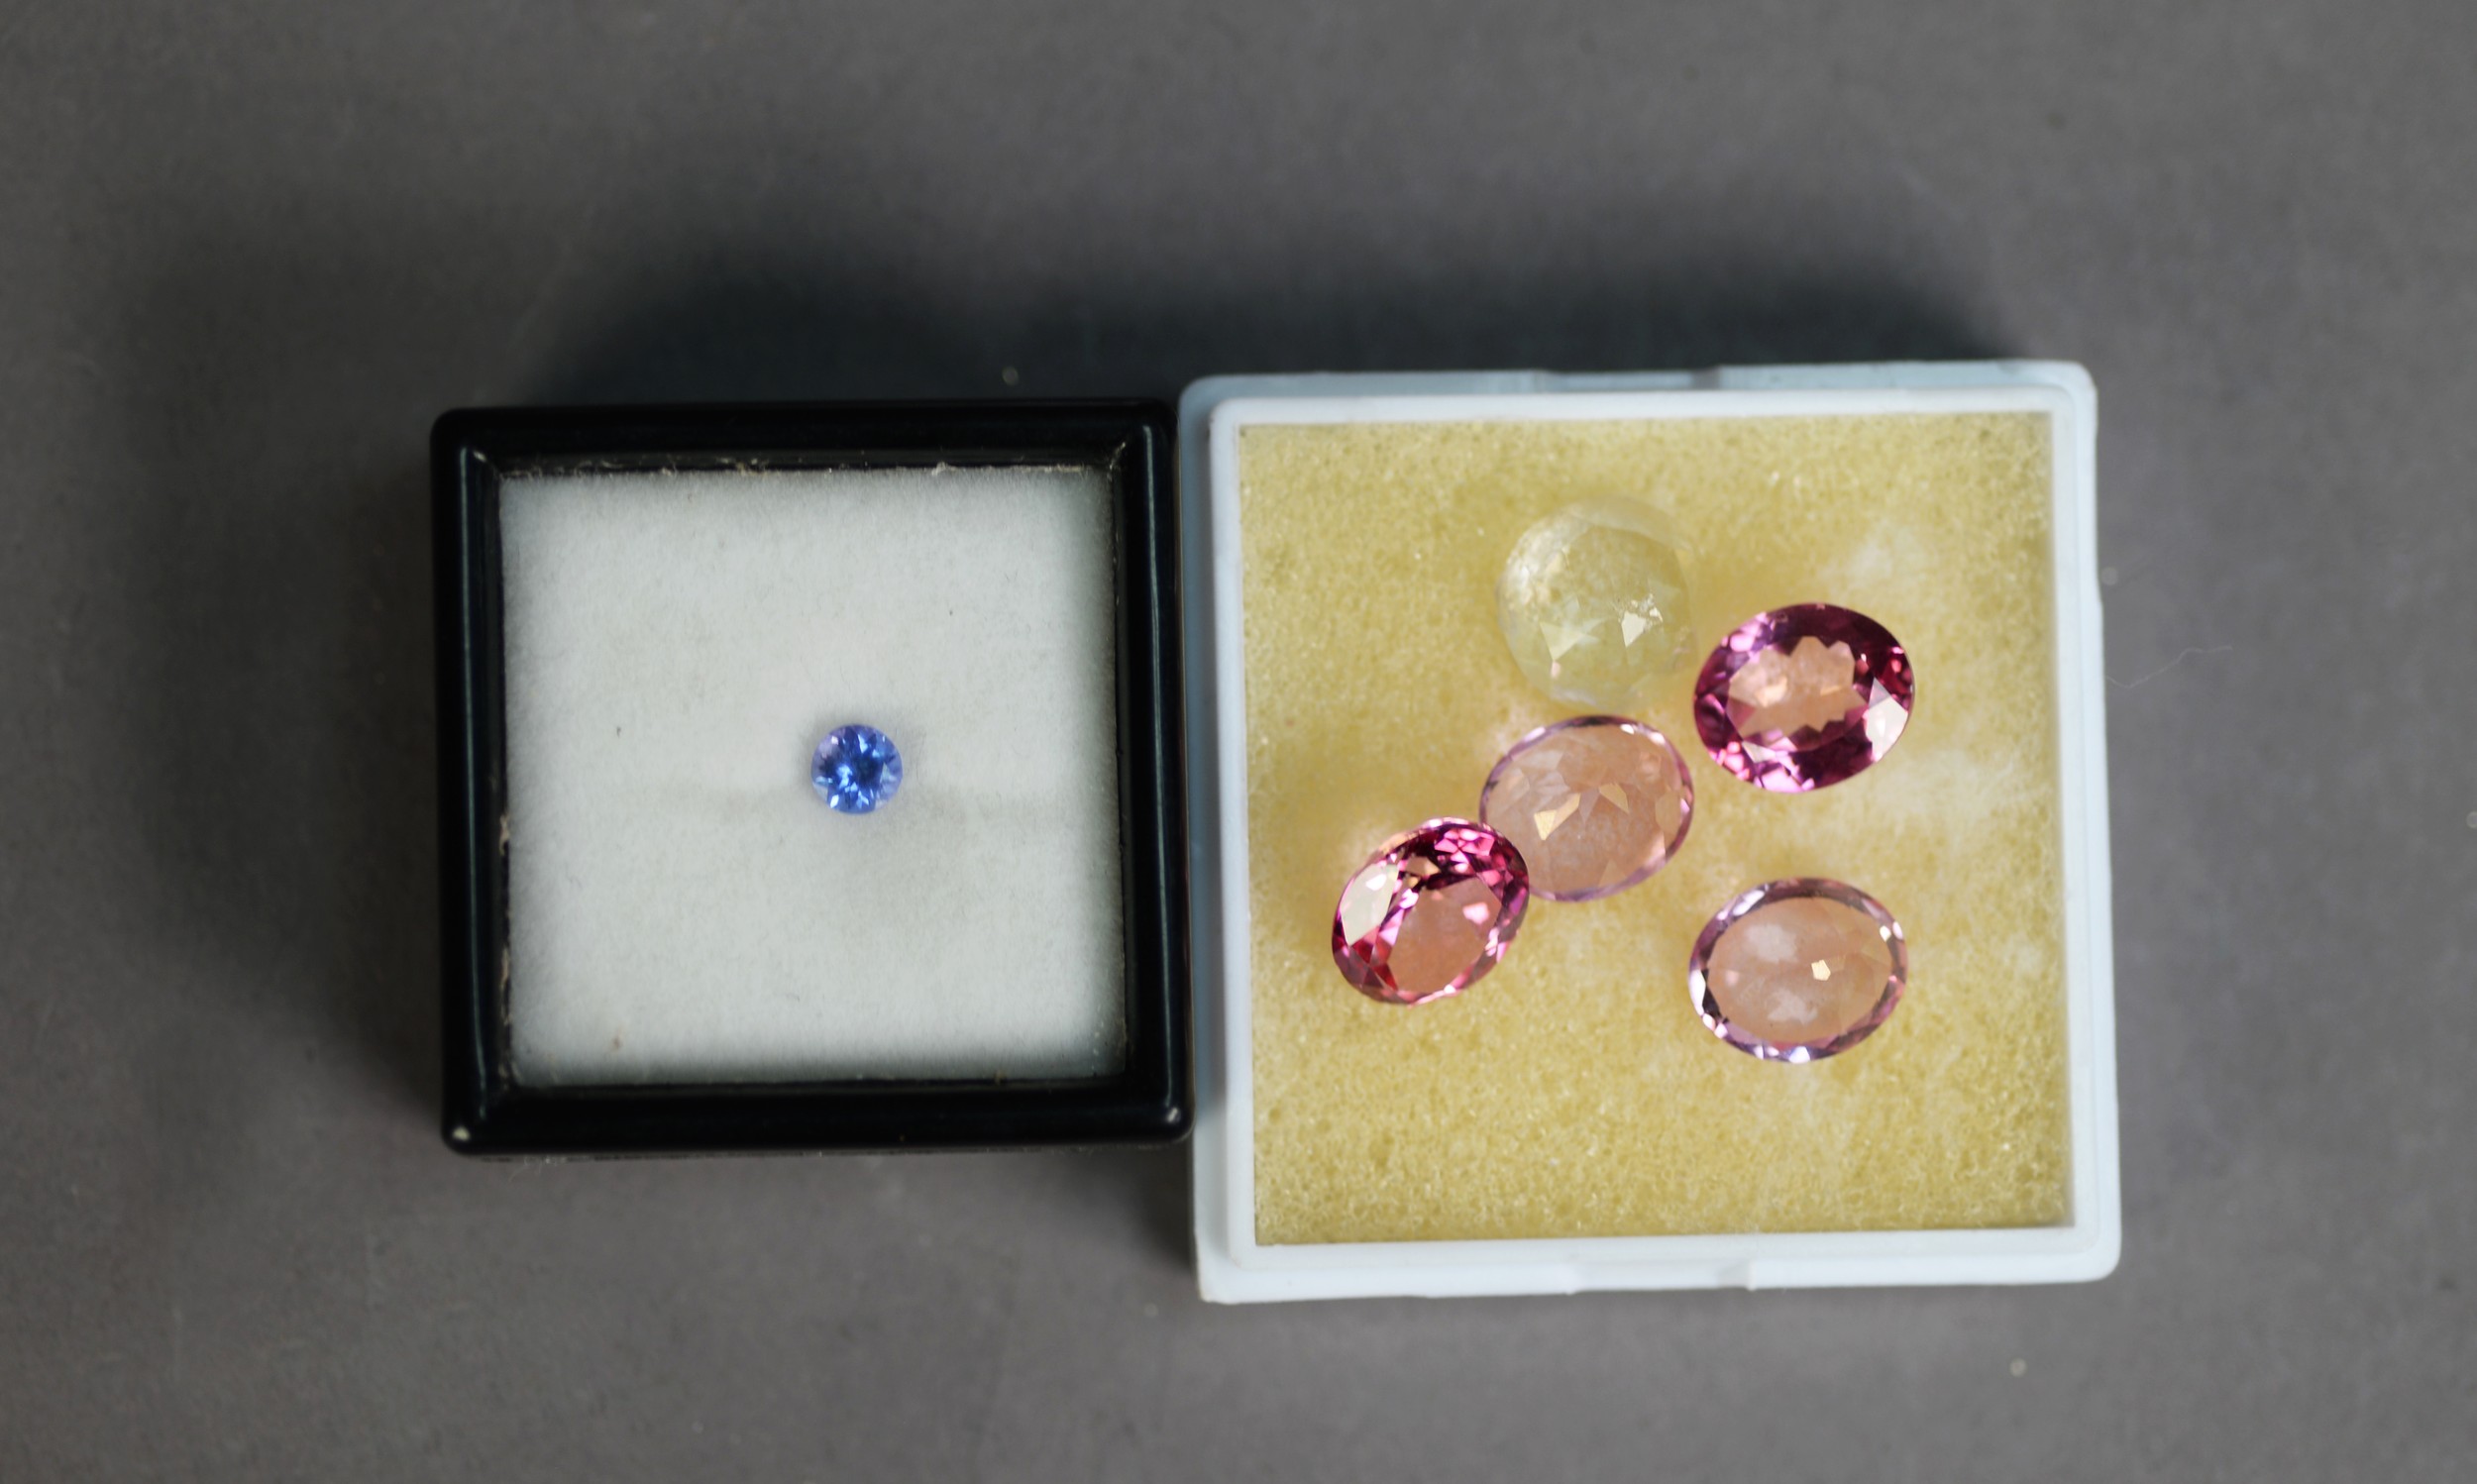 White plastic vision box containing FOUR UNMOUNTED PINK GEM STONES and ONE WHITE OVAL GEM STONE